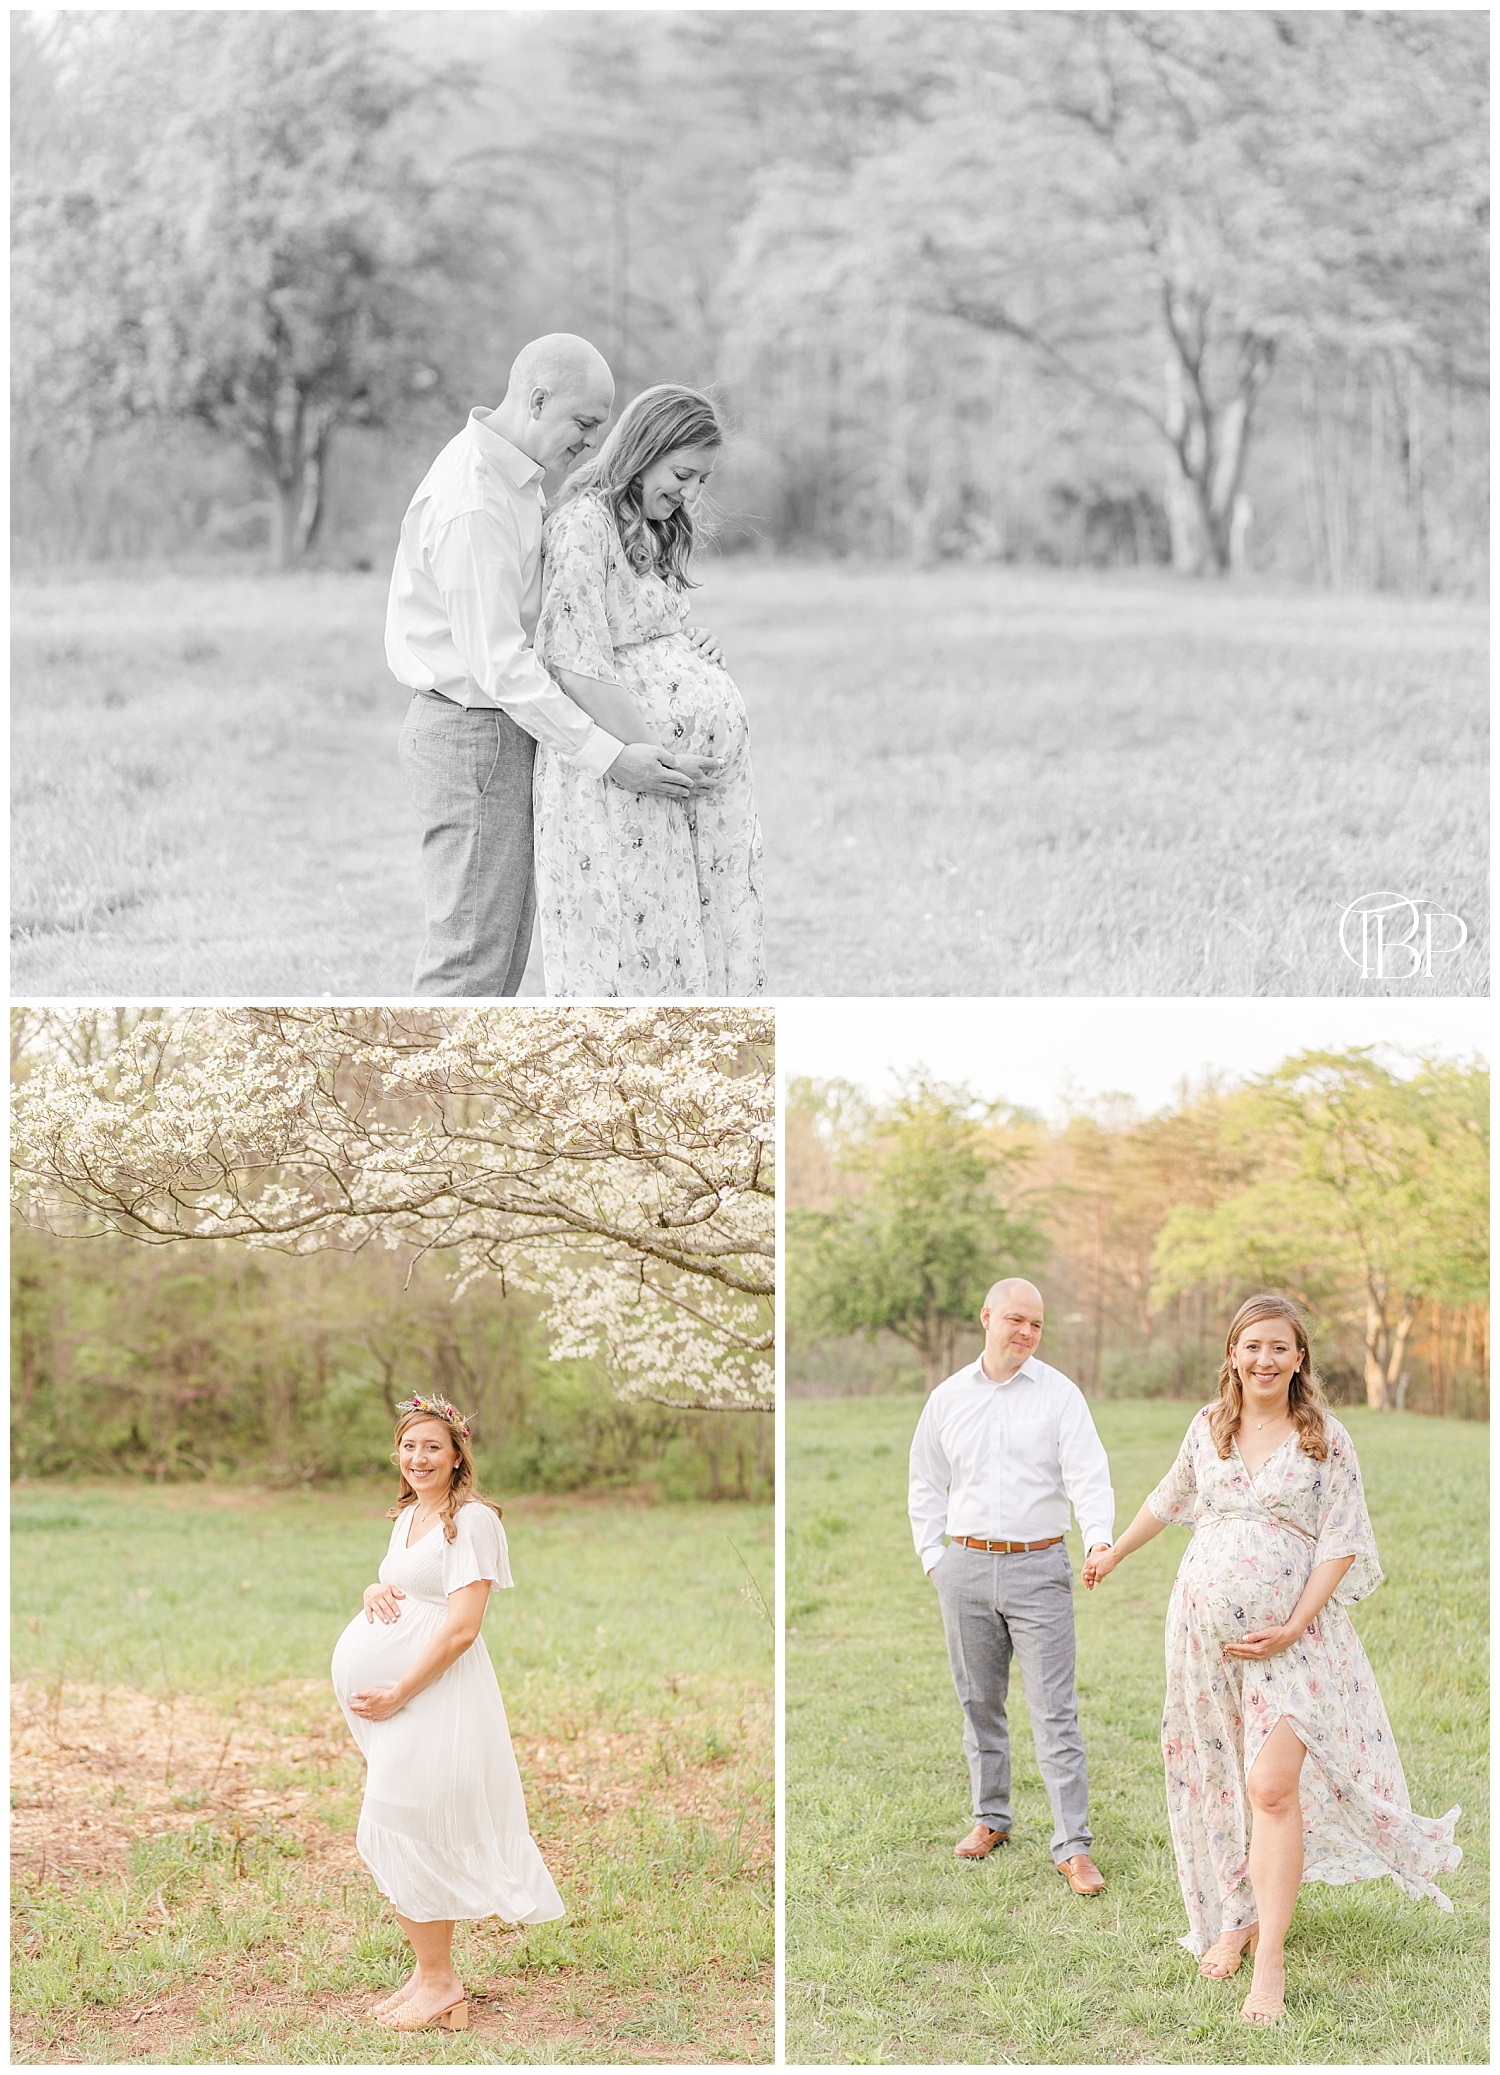 Expecting mom and dad holding hands in the park for their Chantilly, Virginia maternity pictures taken by TuBelle Photography, a Virginia maternity photographer.